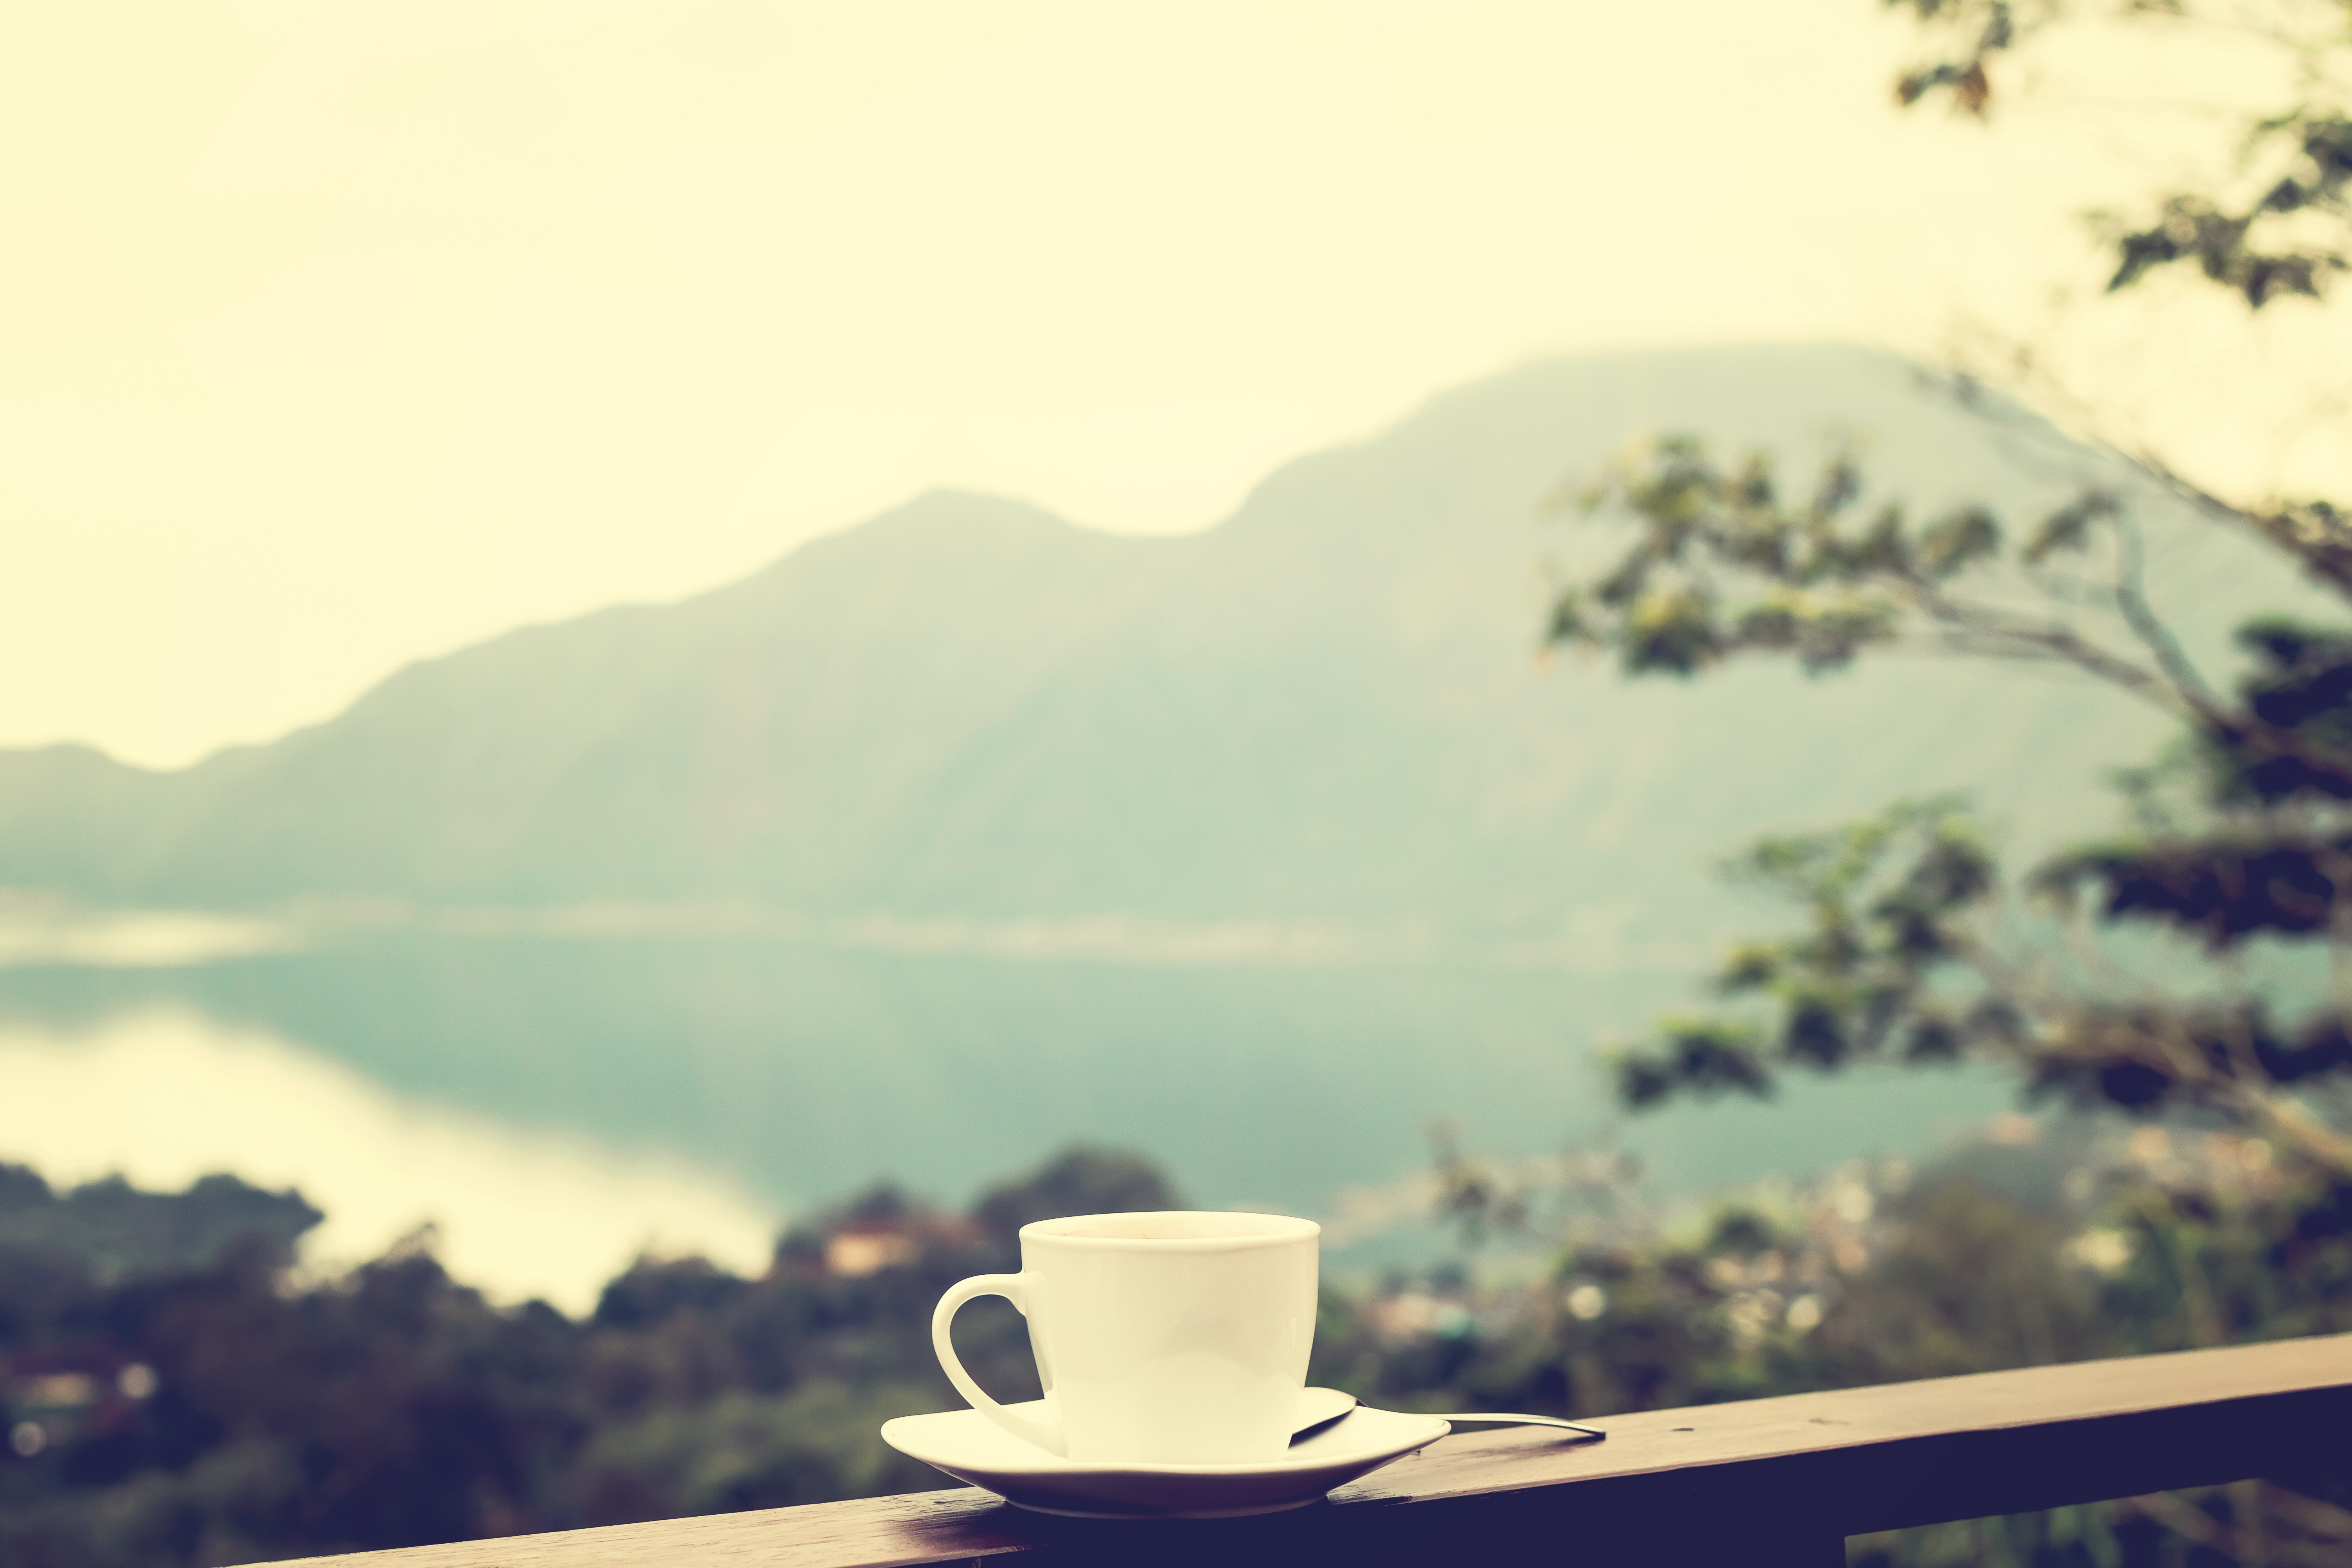 freedom, mountains, privacy, seclusion, miscellanea, miscellaneous, cup, mood Full HD